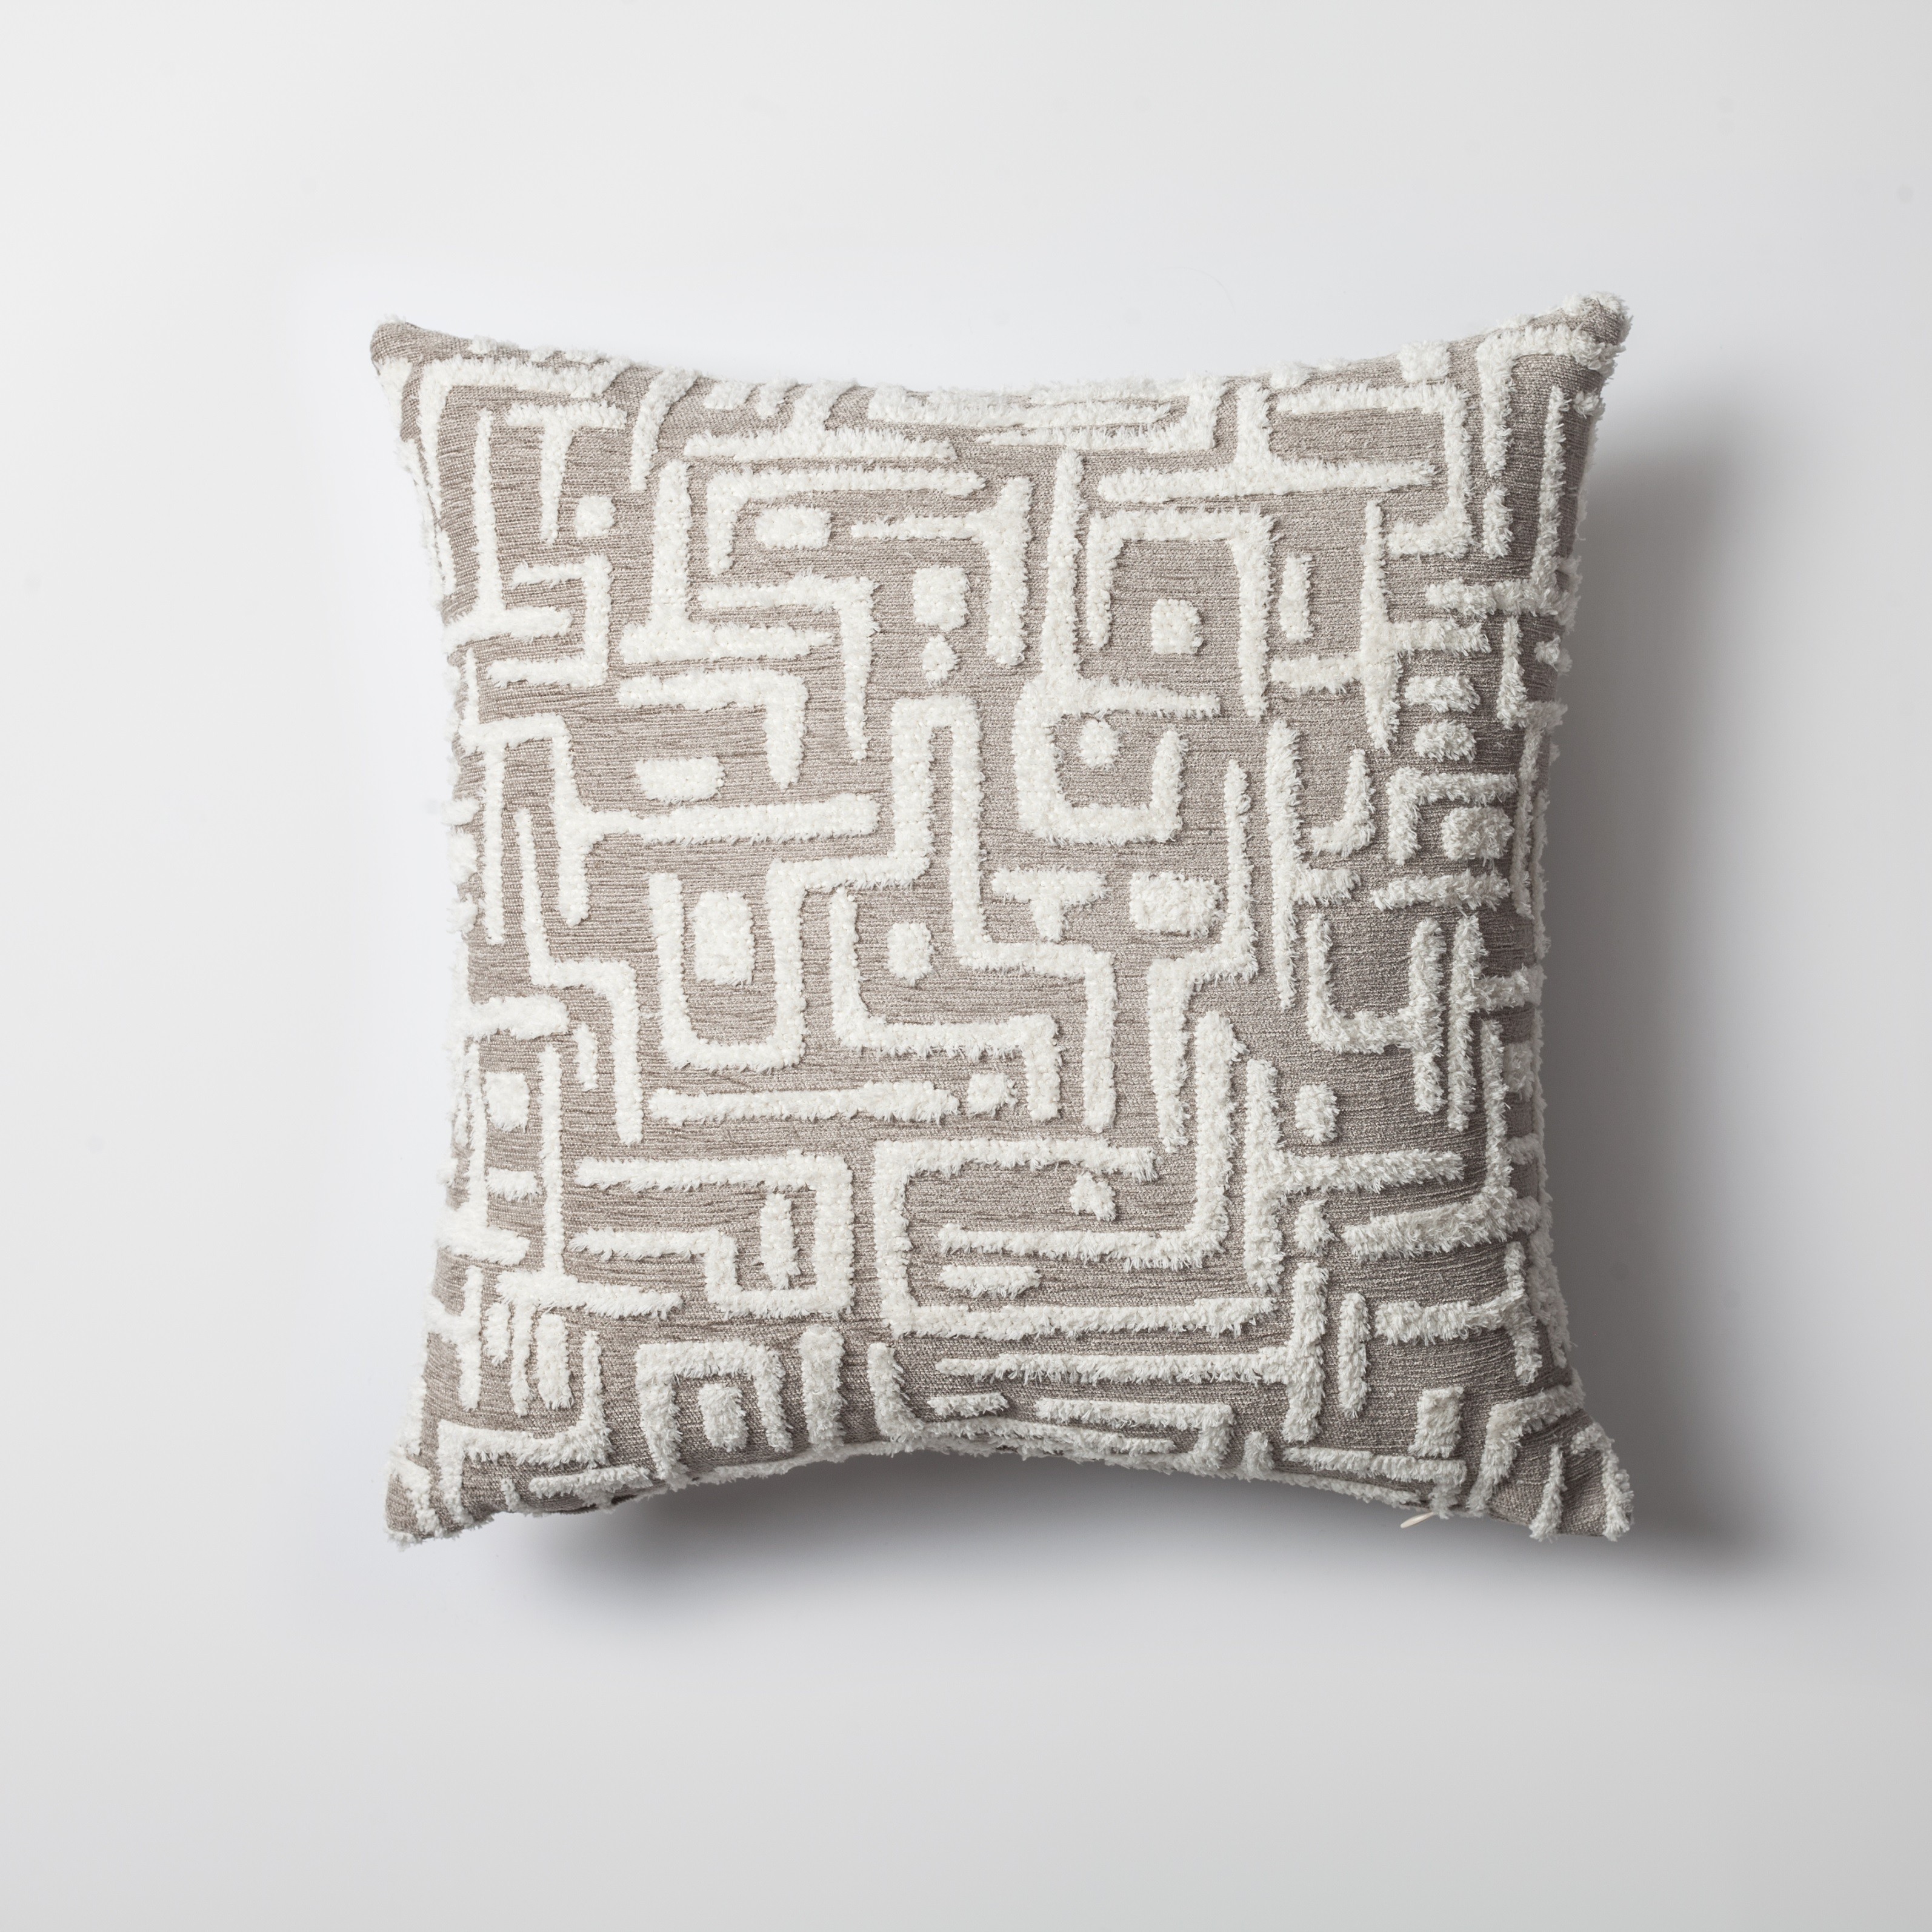 "Gilda" - Maze Patterned Linen Pillow 18x18 Inch - Beige (Cover Only)